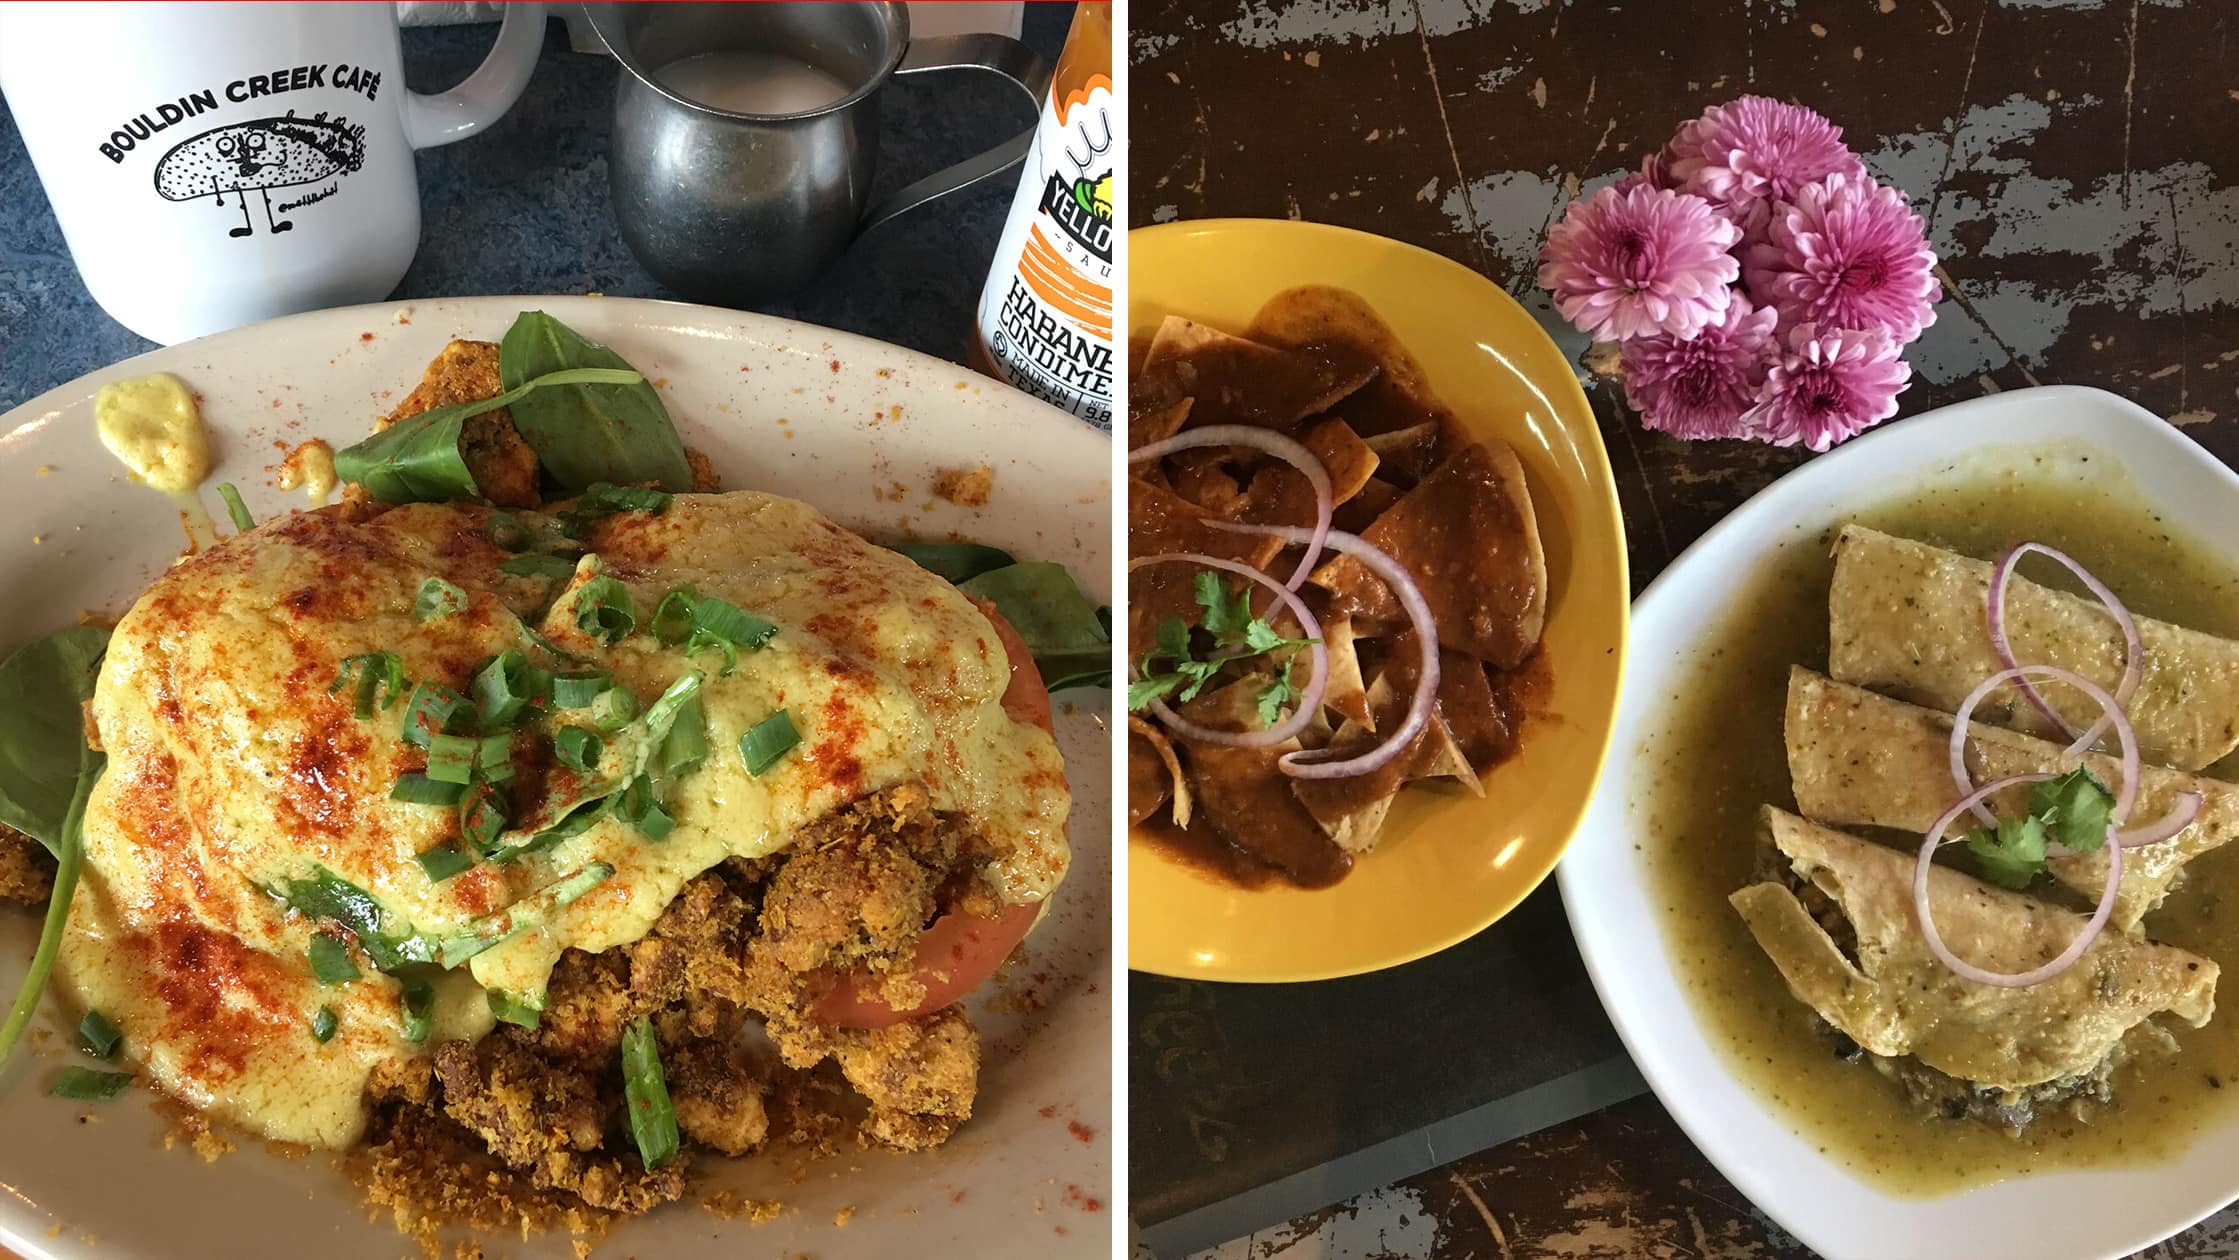 Left: Breakfast in Austin, Texas | Right: Chilaquiles verdes in Mexico City